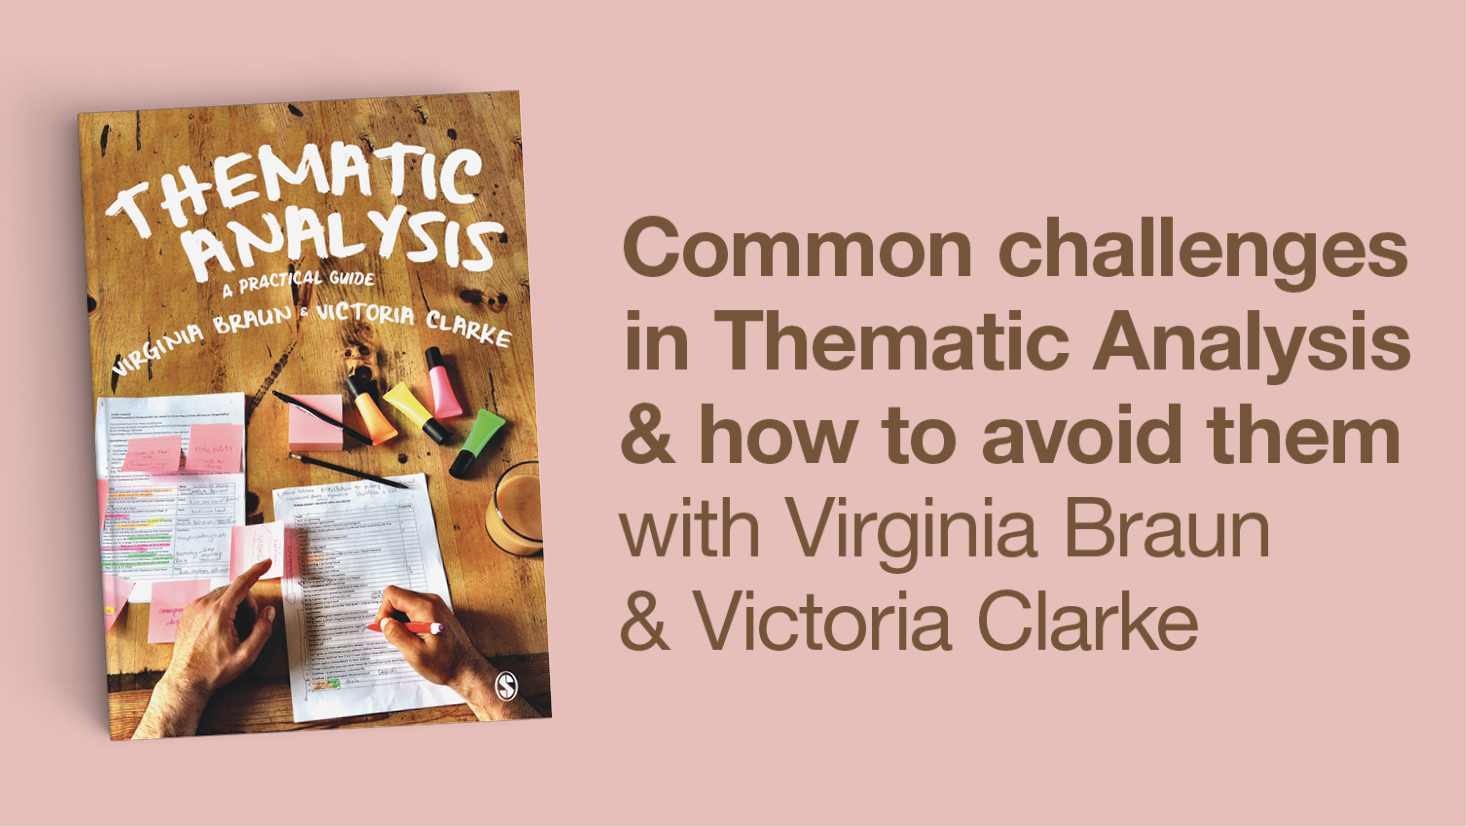 Common challenges in Thematic Analysis and how to avoid them with Virginia Braun & Victoria Clarke